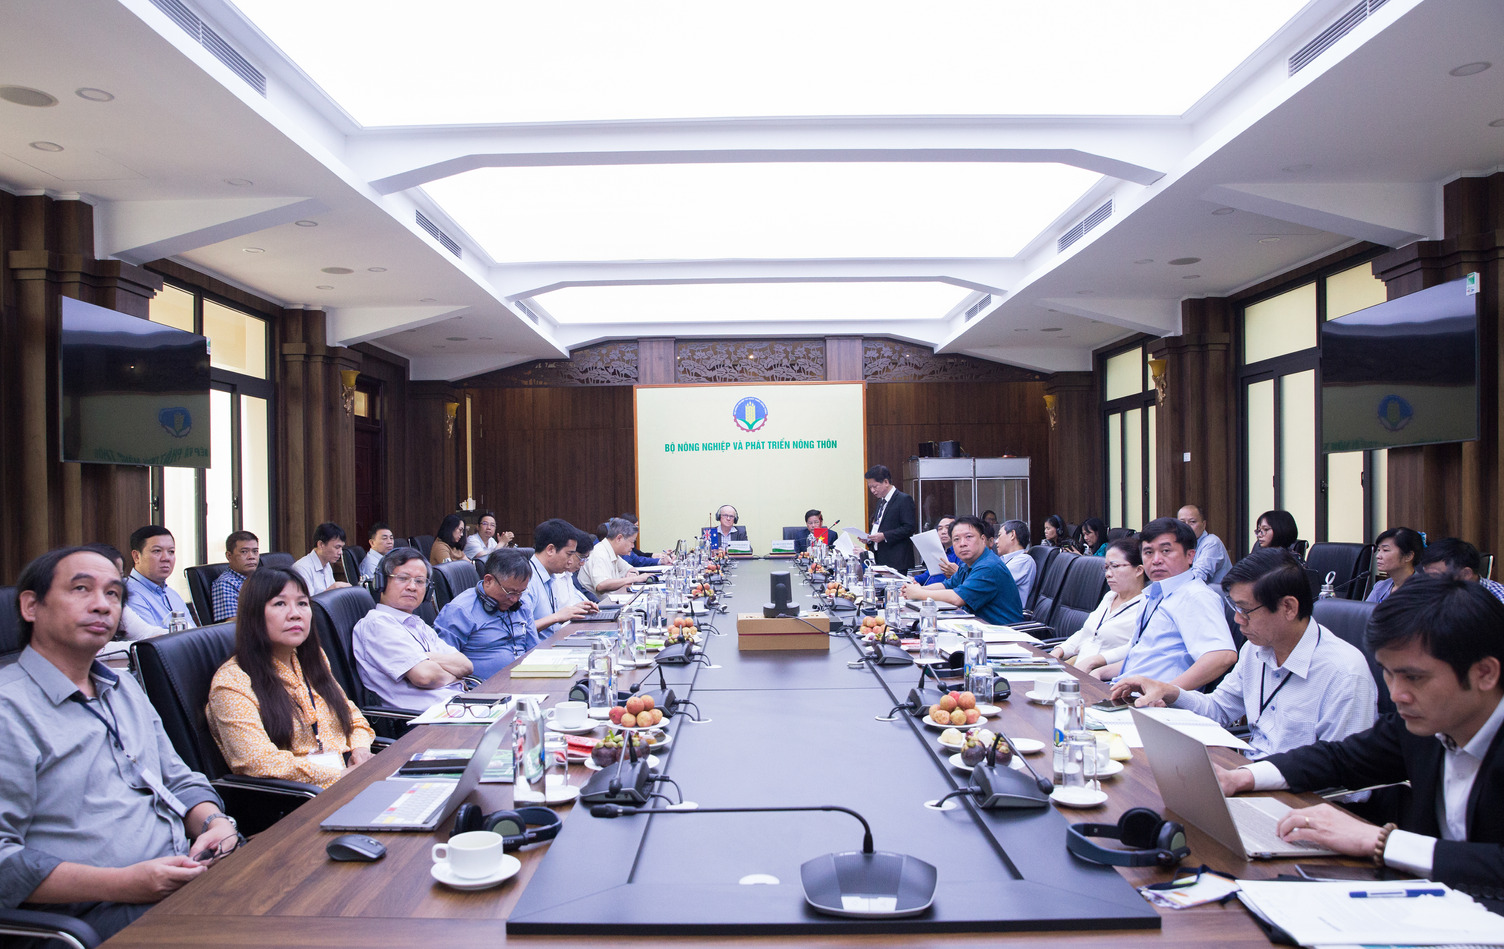 Many long-standing partners join the mid-term review of ACIAR-Vietnam research collaboration strategy co-hosted by ACIAR and Vietnam’s Ministry of Agricultural and Rural Development in Hanoi in June 2022. Photo: Khanh Long for ACIAR Vietnam.